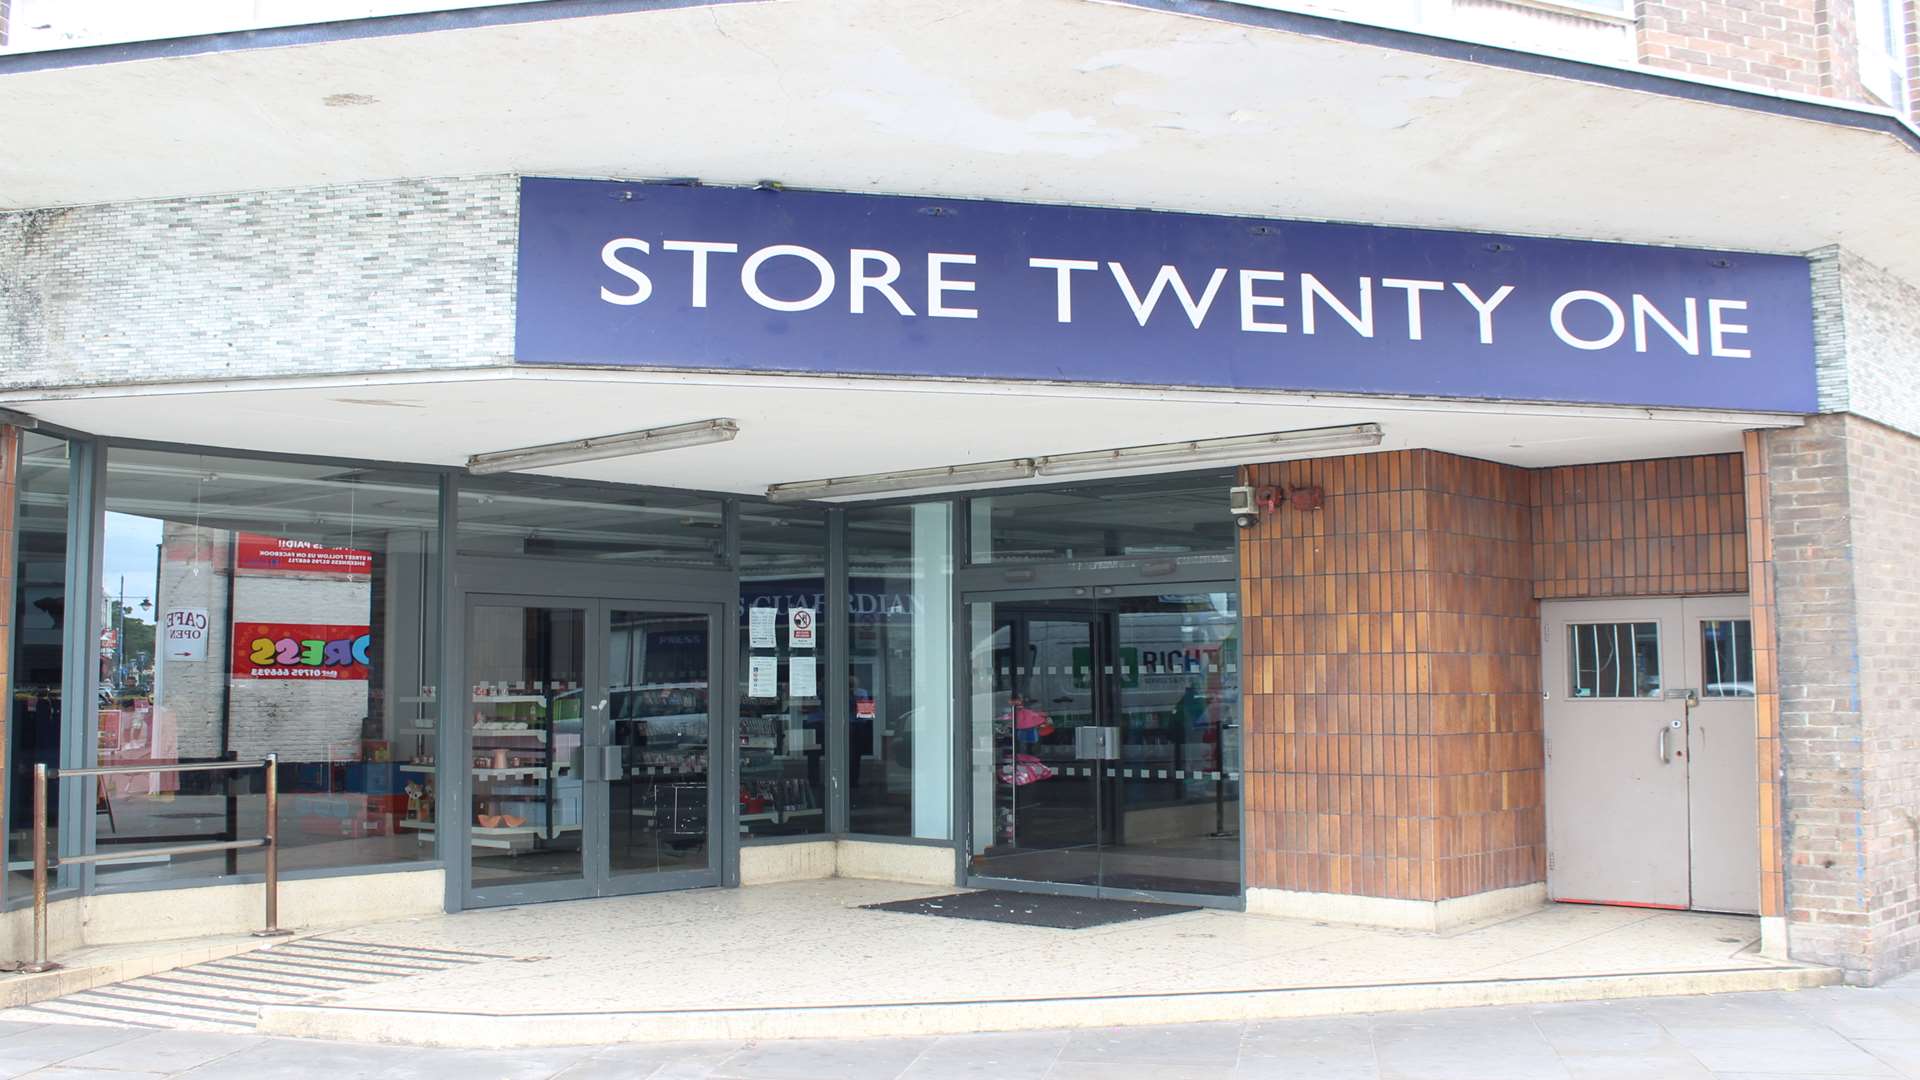 Front doors remained closed at the Store Twenty One premises today